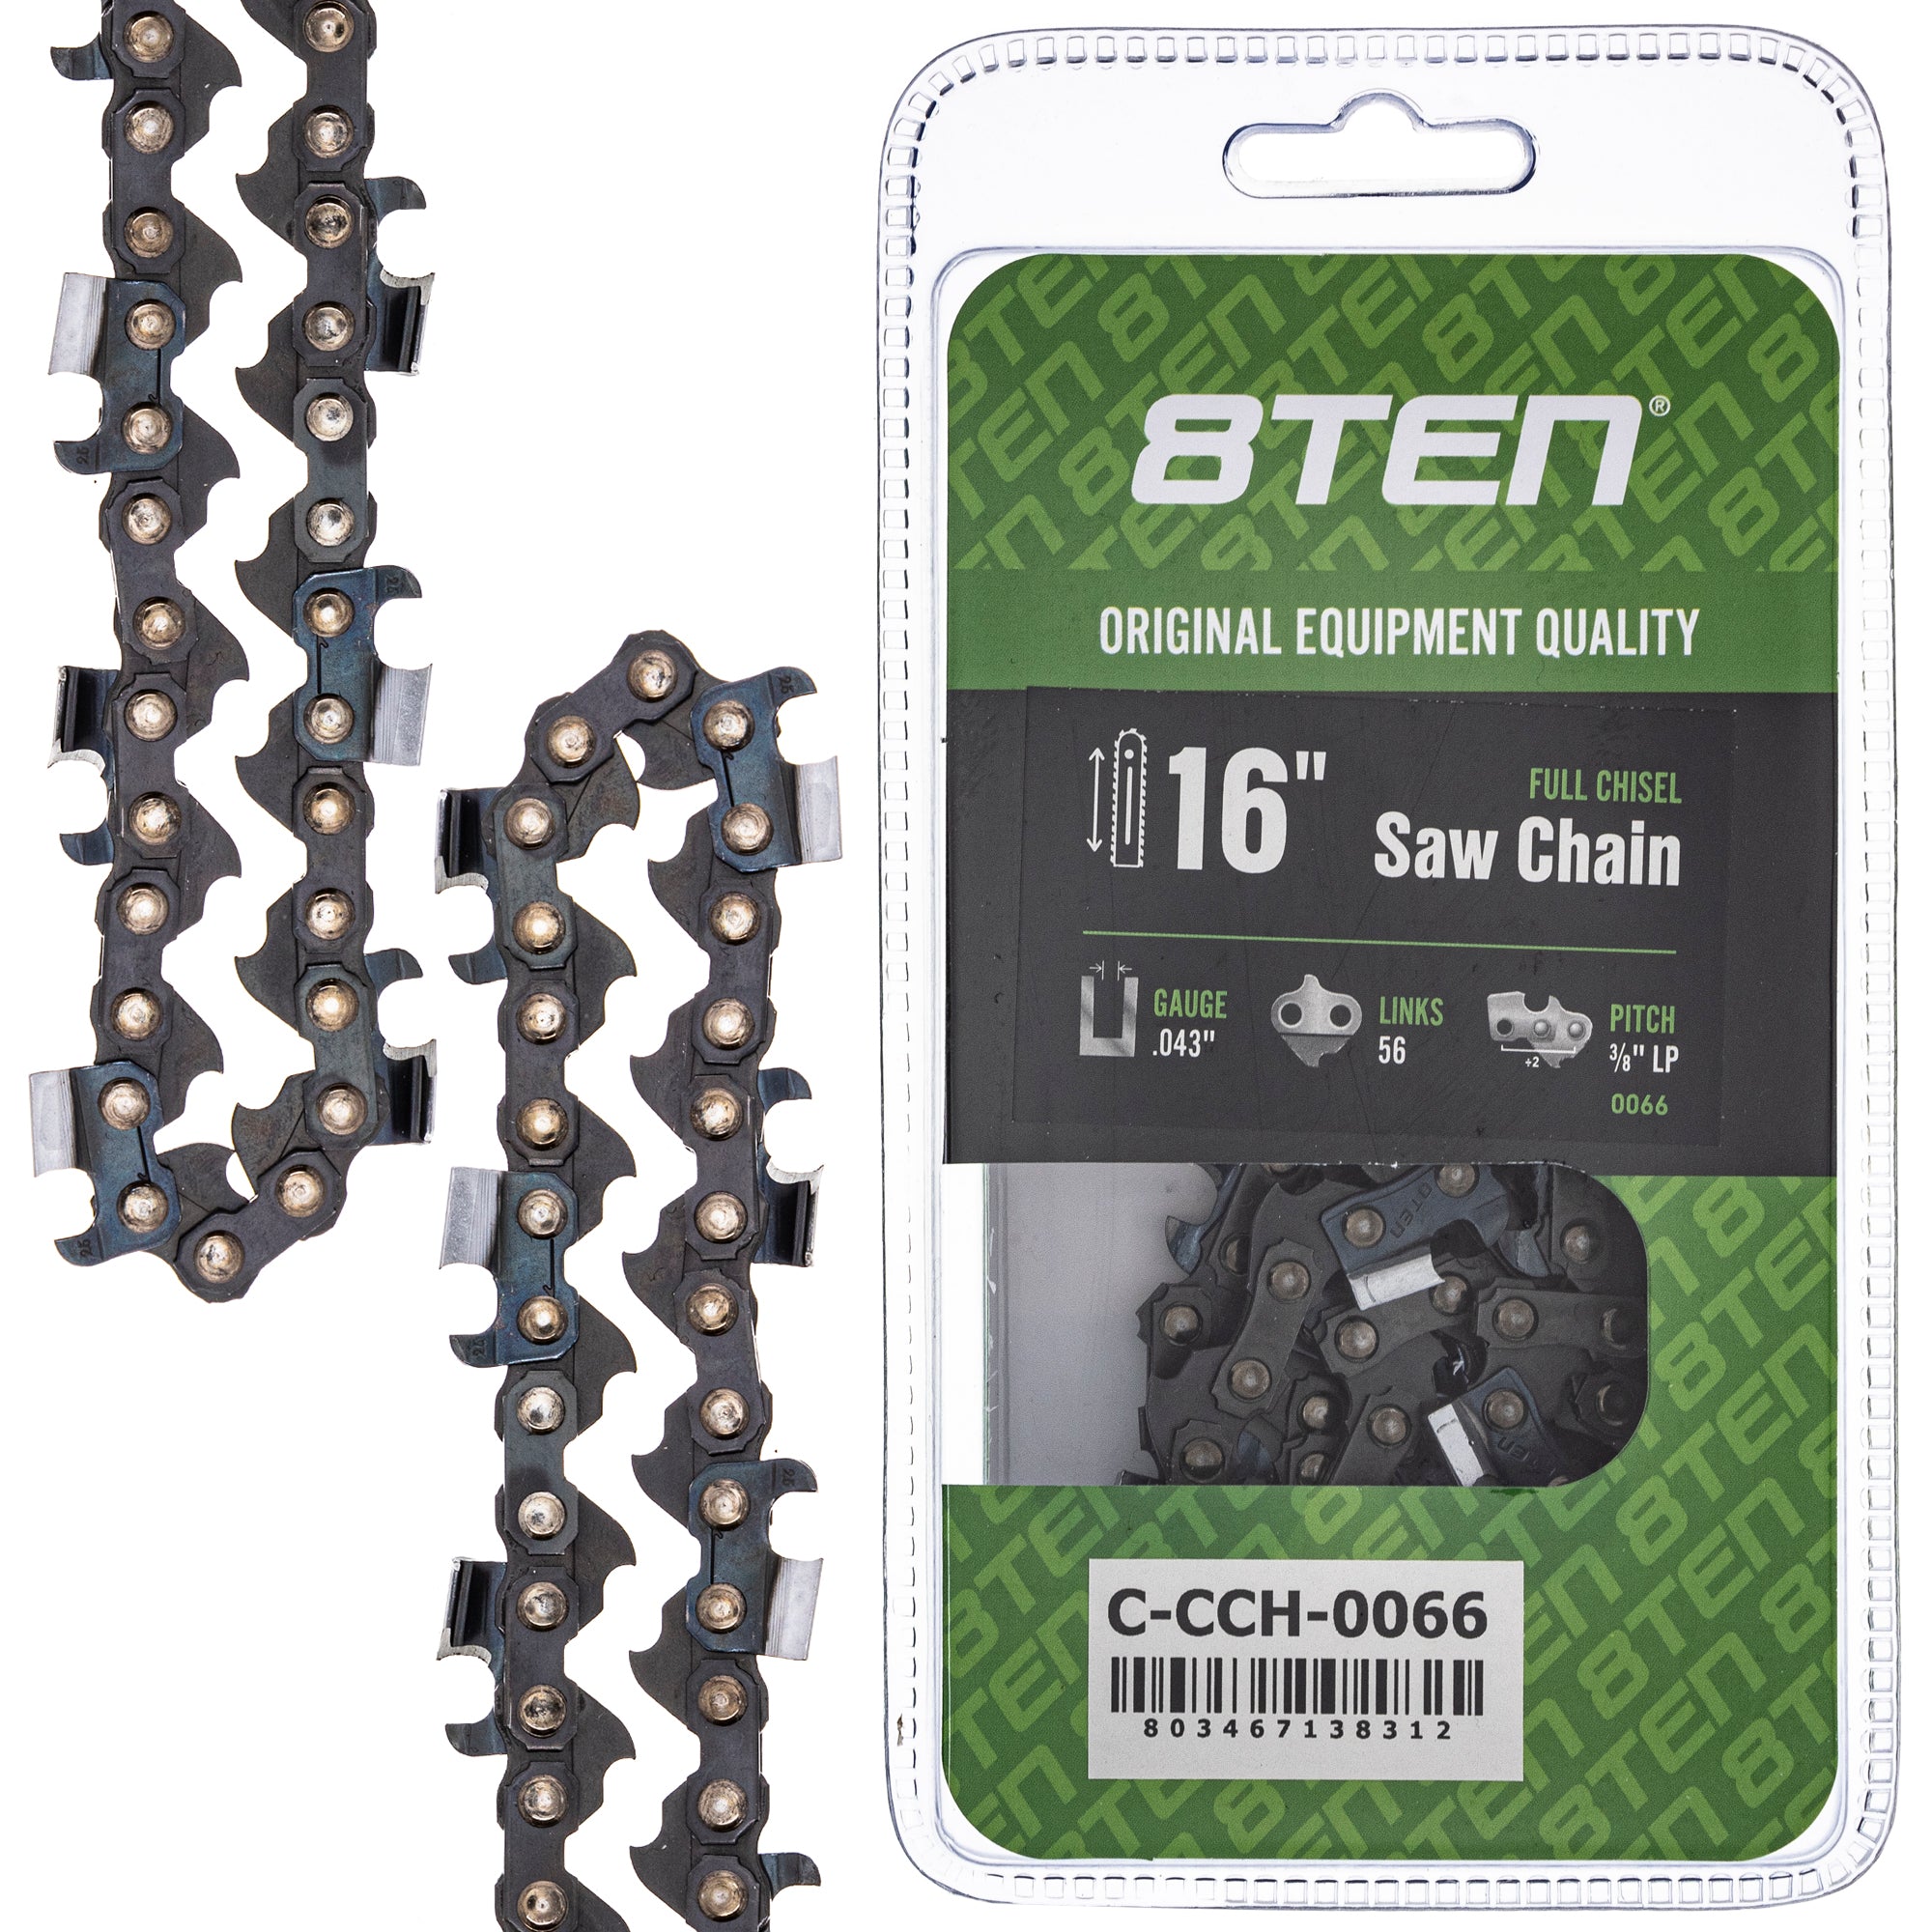 Chainsaw Chain 16 Inch .043 3/8 LP 56DL for zOTHER Oregon XCU04 XCU03 UC4551A UC4550A 8TEN 810-CCC2288H